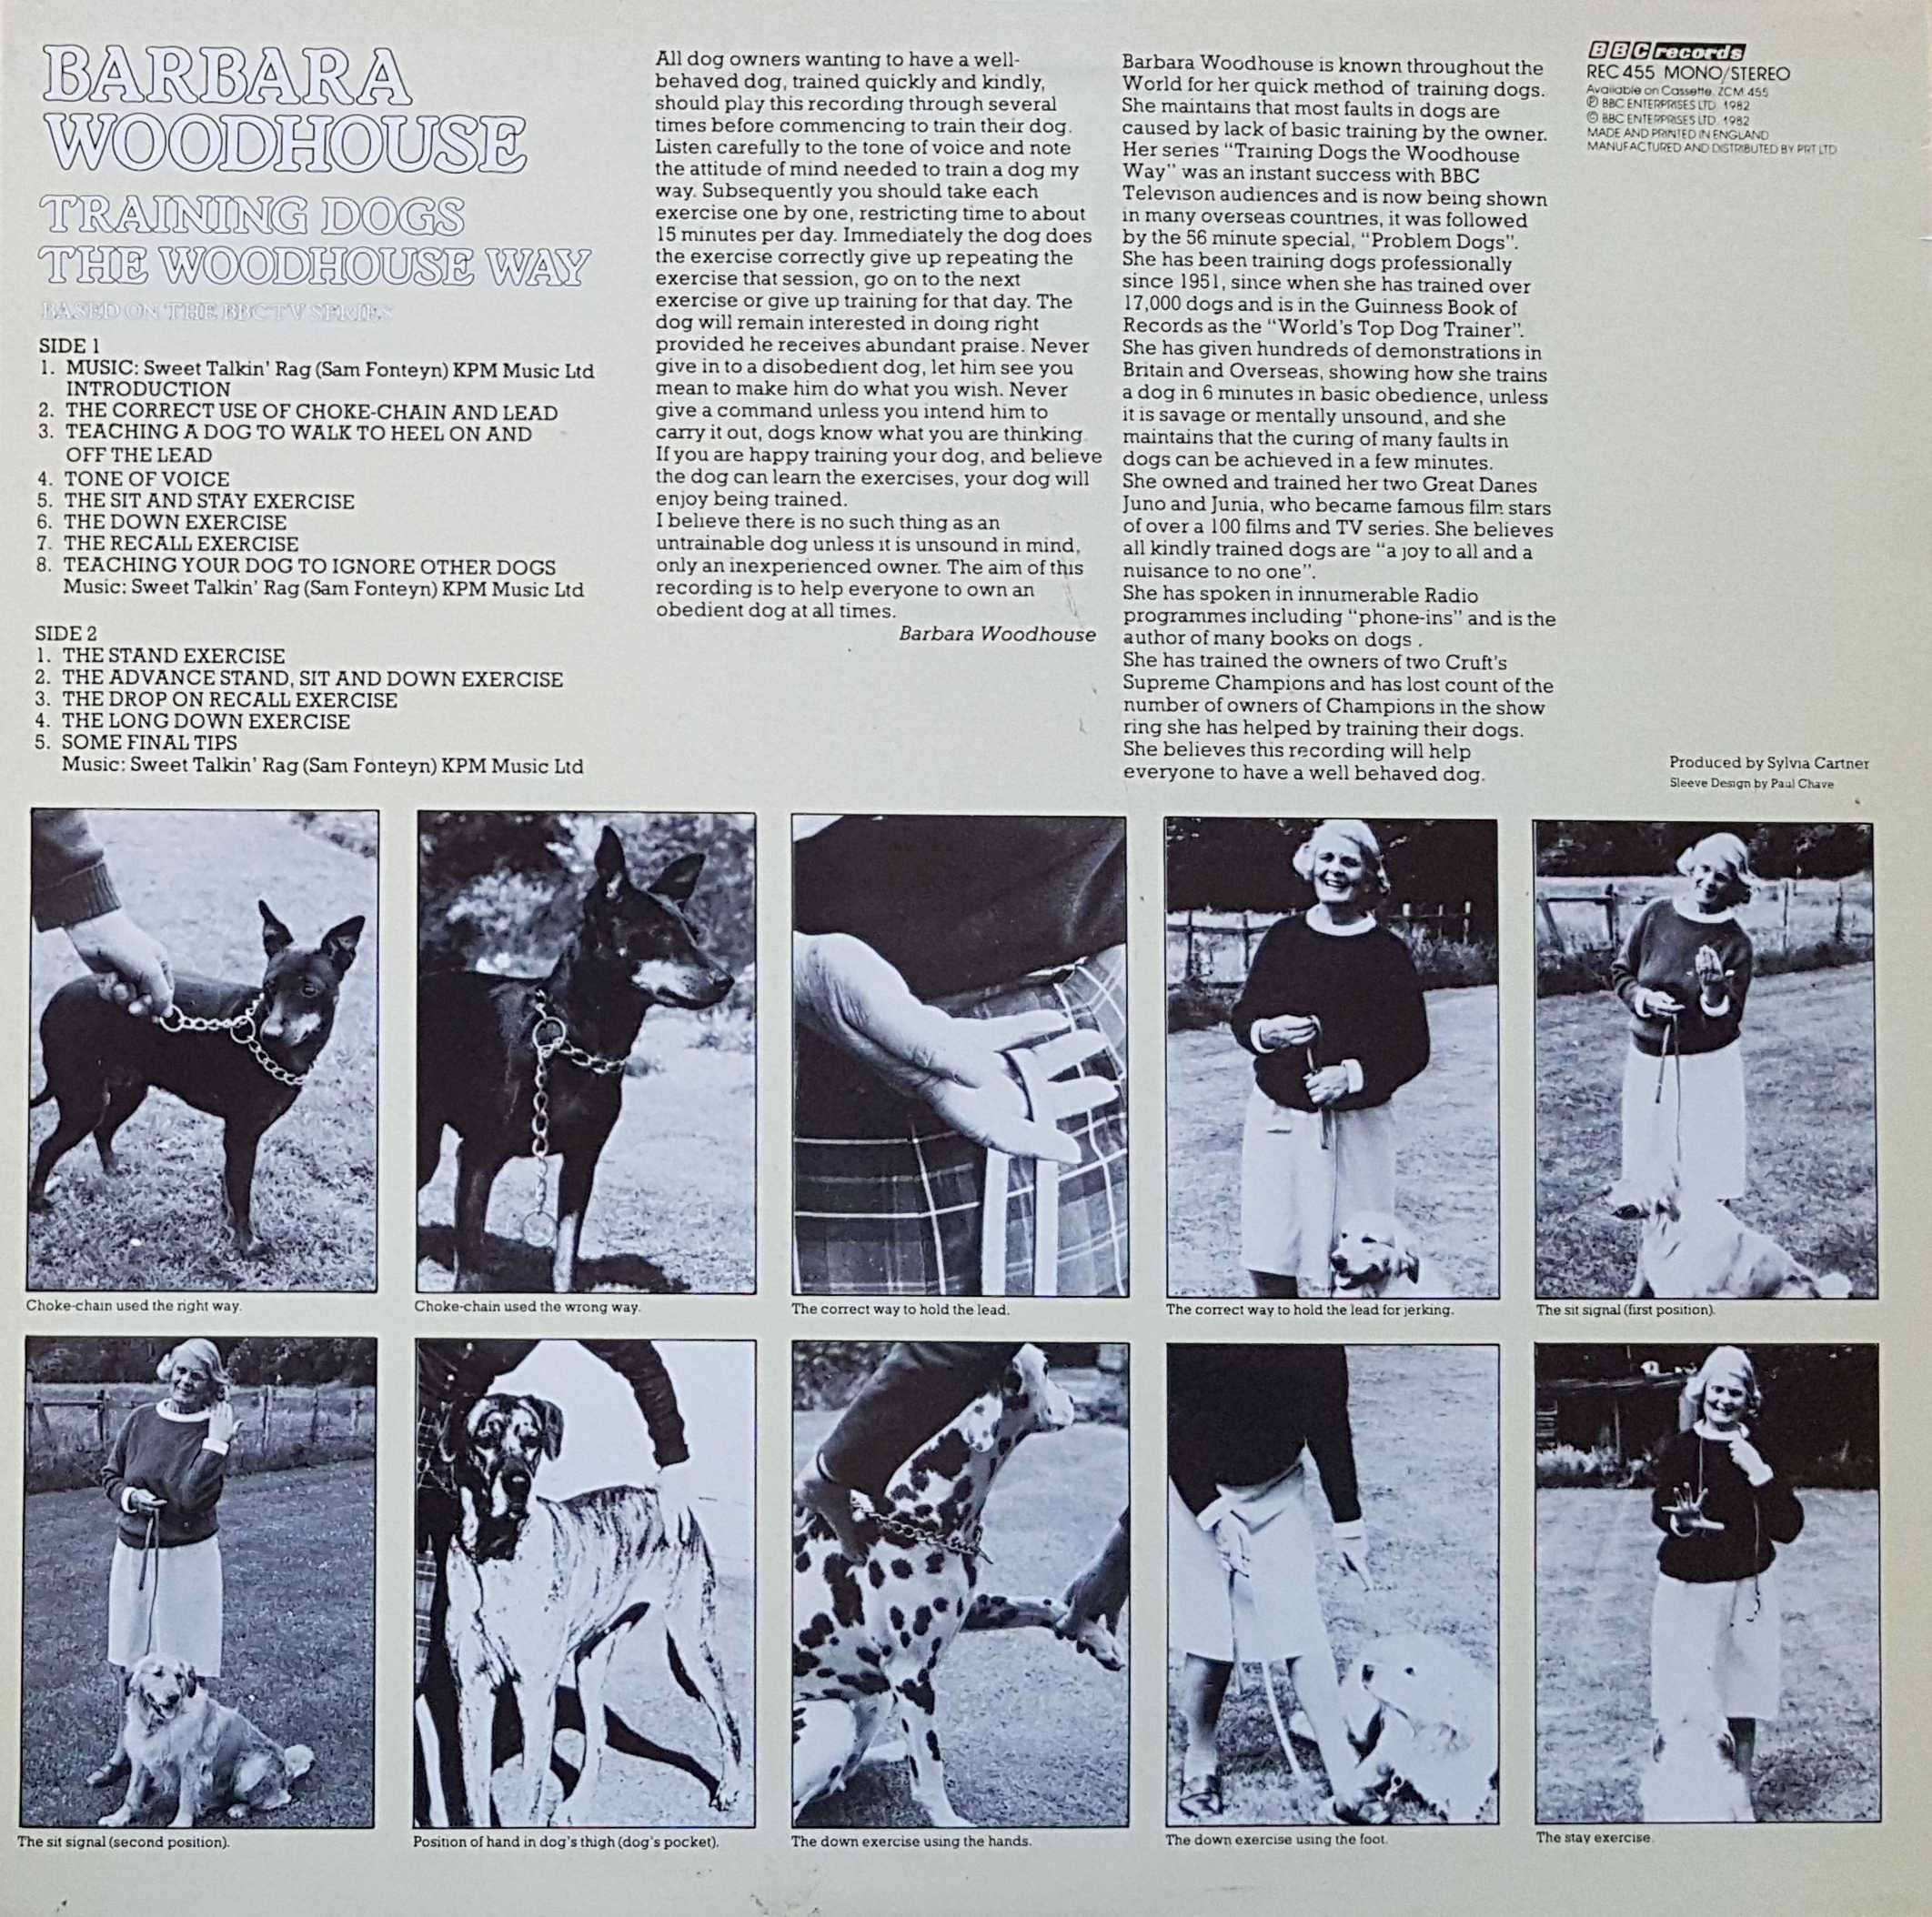 Picture of REC 455 Training dogs the Woodhouse way by artist Barbara Woodhouse from the BBC records and Tapes library